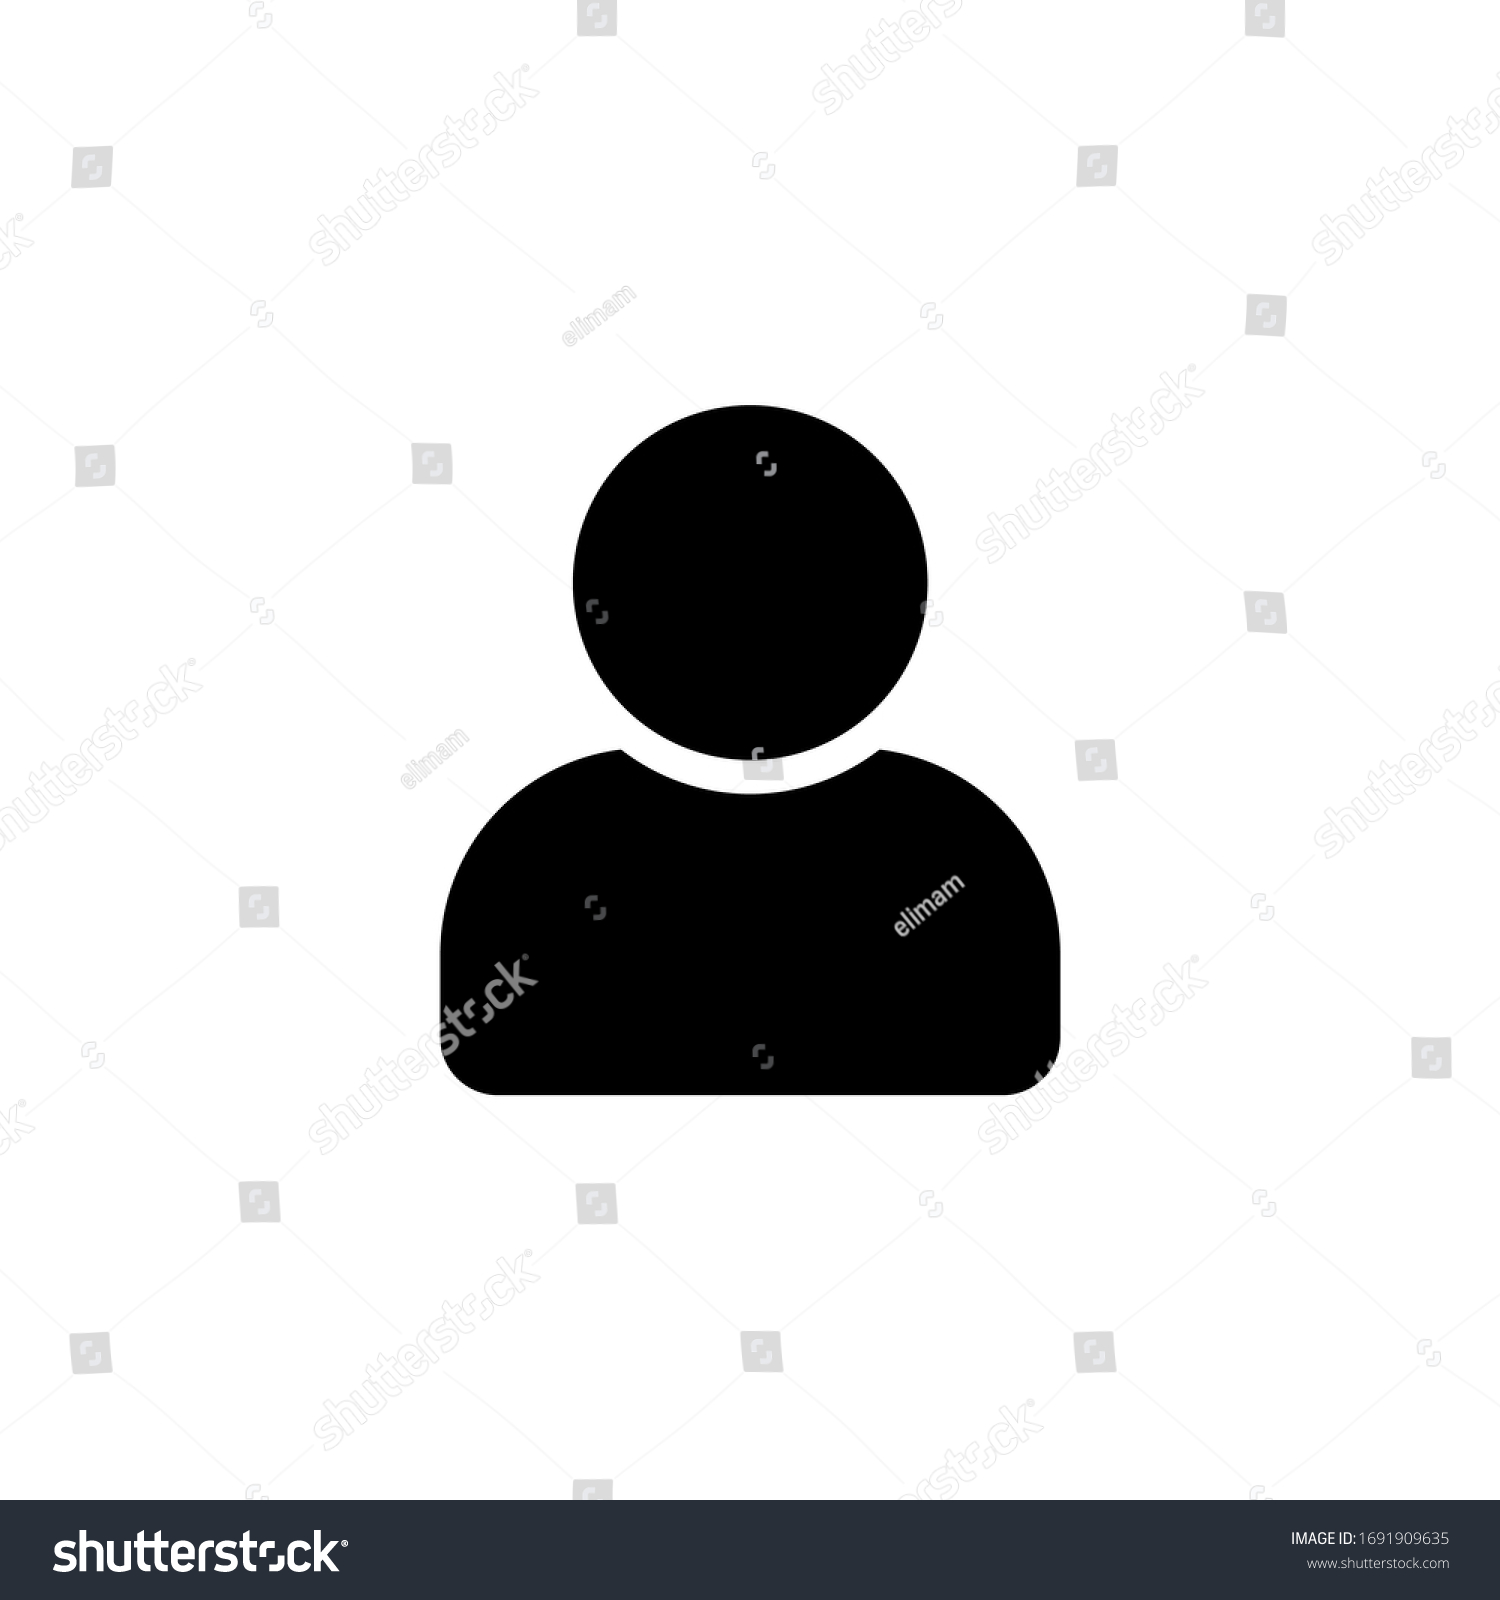 People and person icon. people icon with modern flat design. People vector icon isolated on white background #1691909635